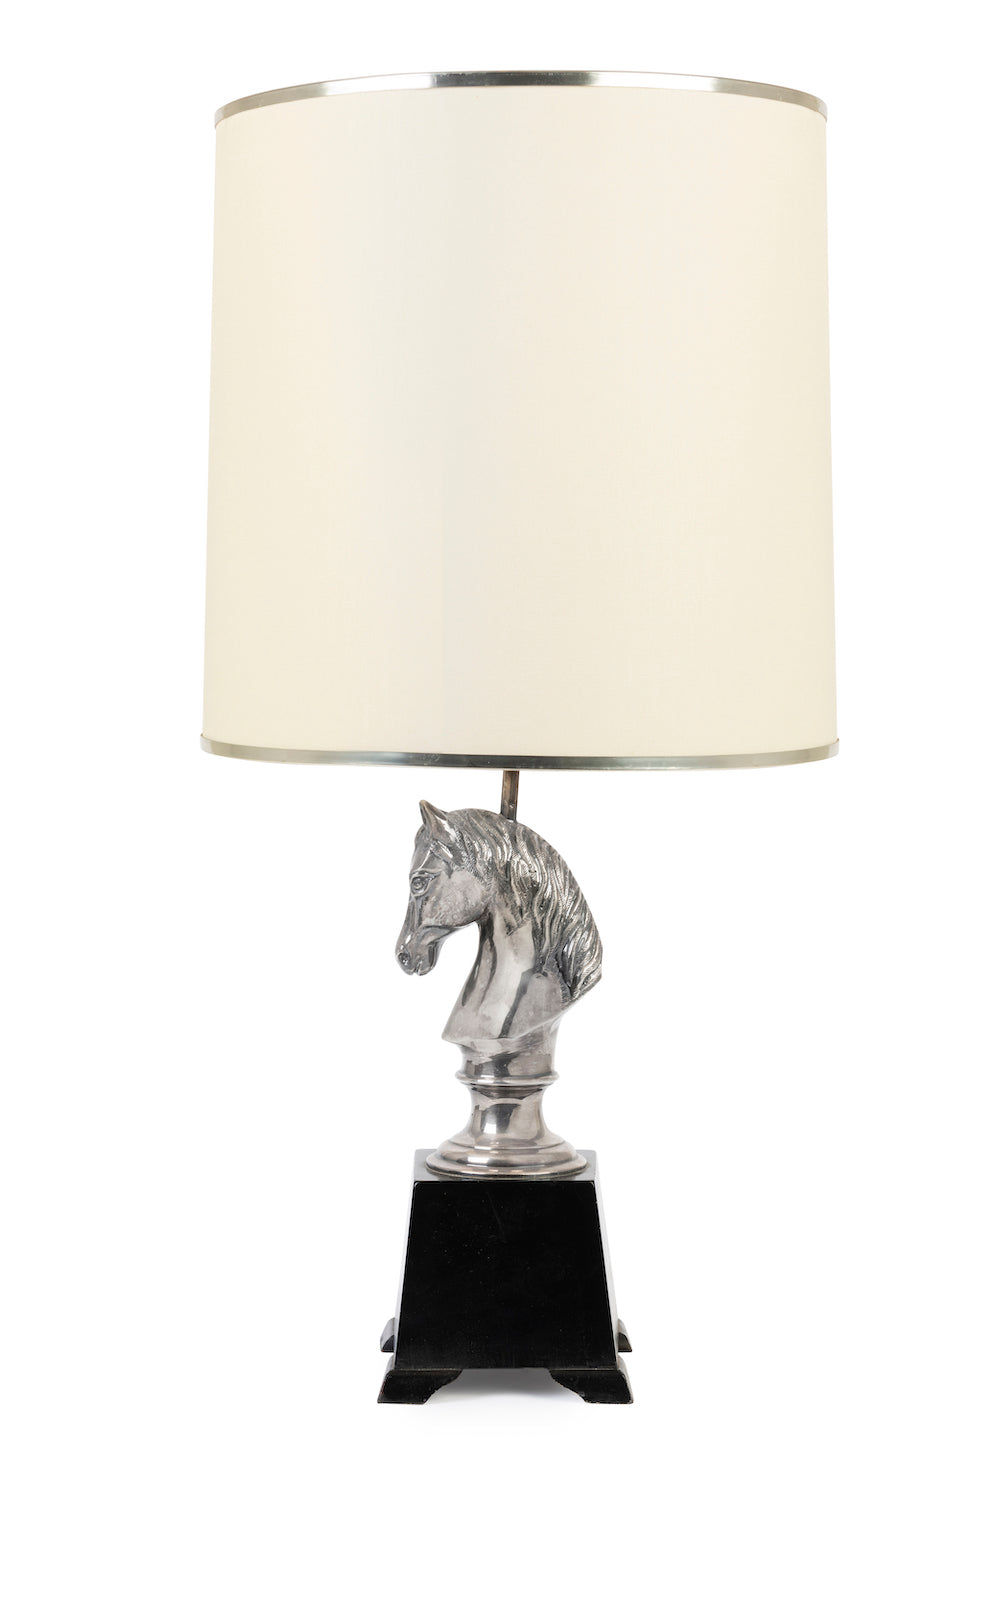 SOLD A stylish silver-plated horse-head table lamp, Italian Circa 1950